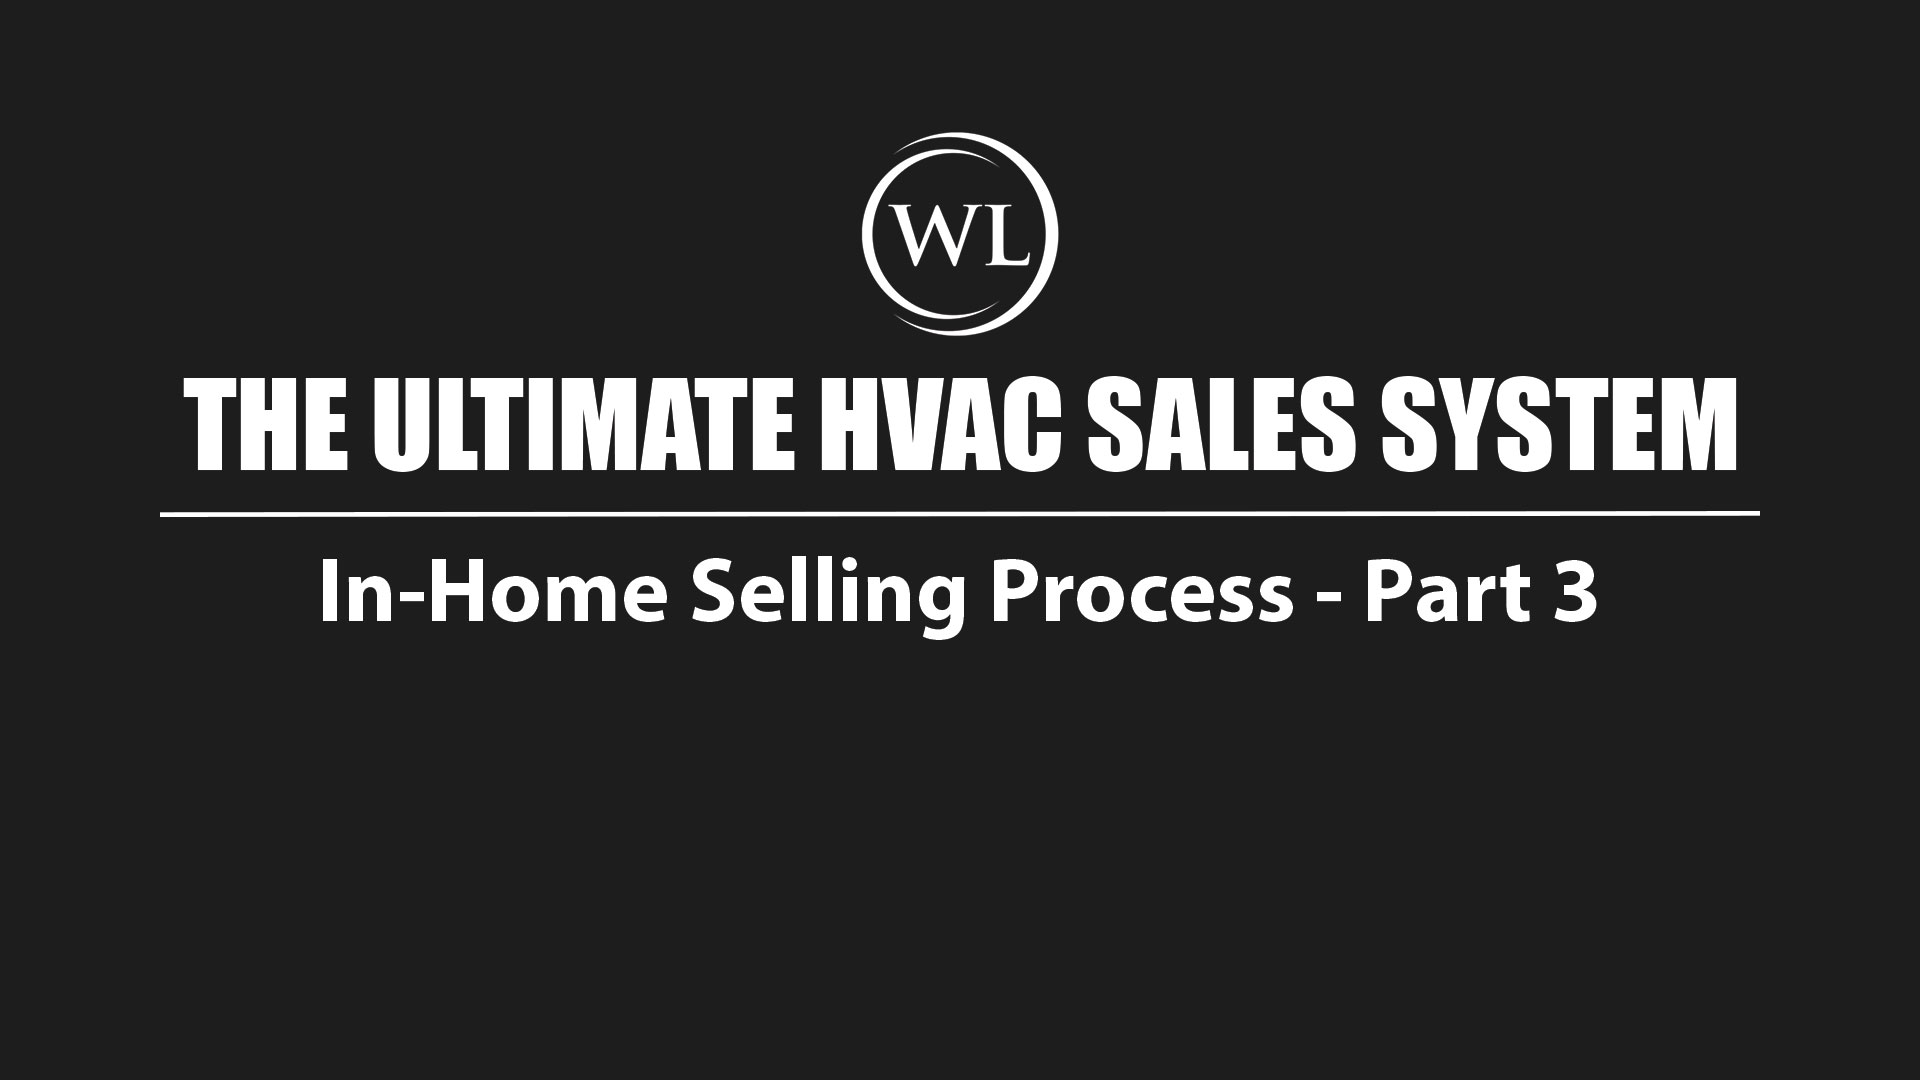 In-Home Selling Process – Part 3